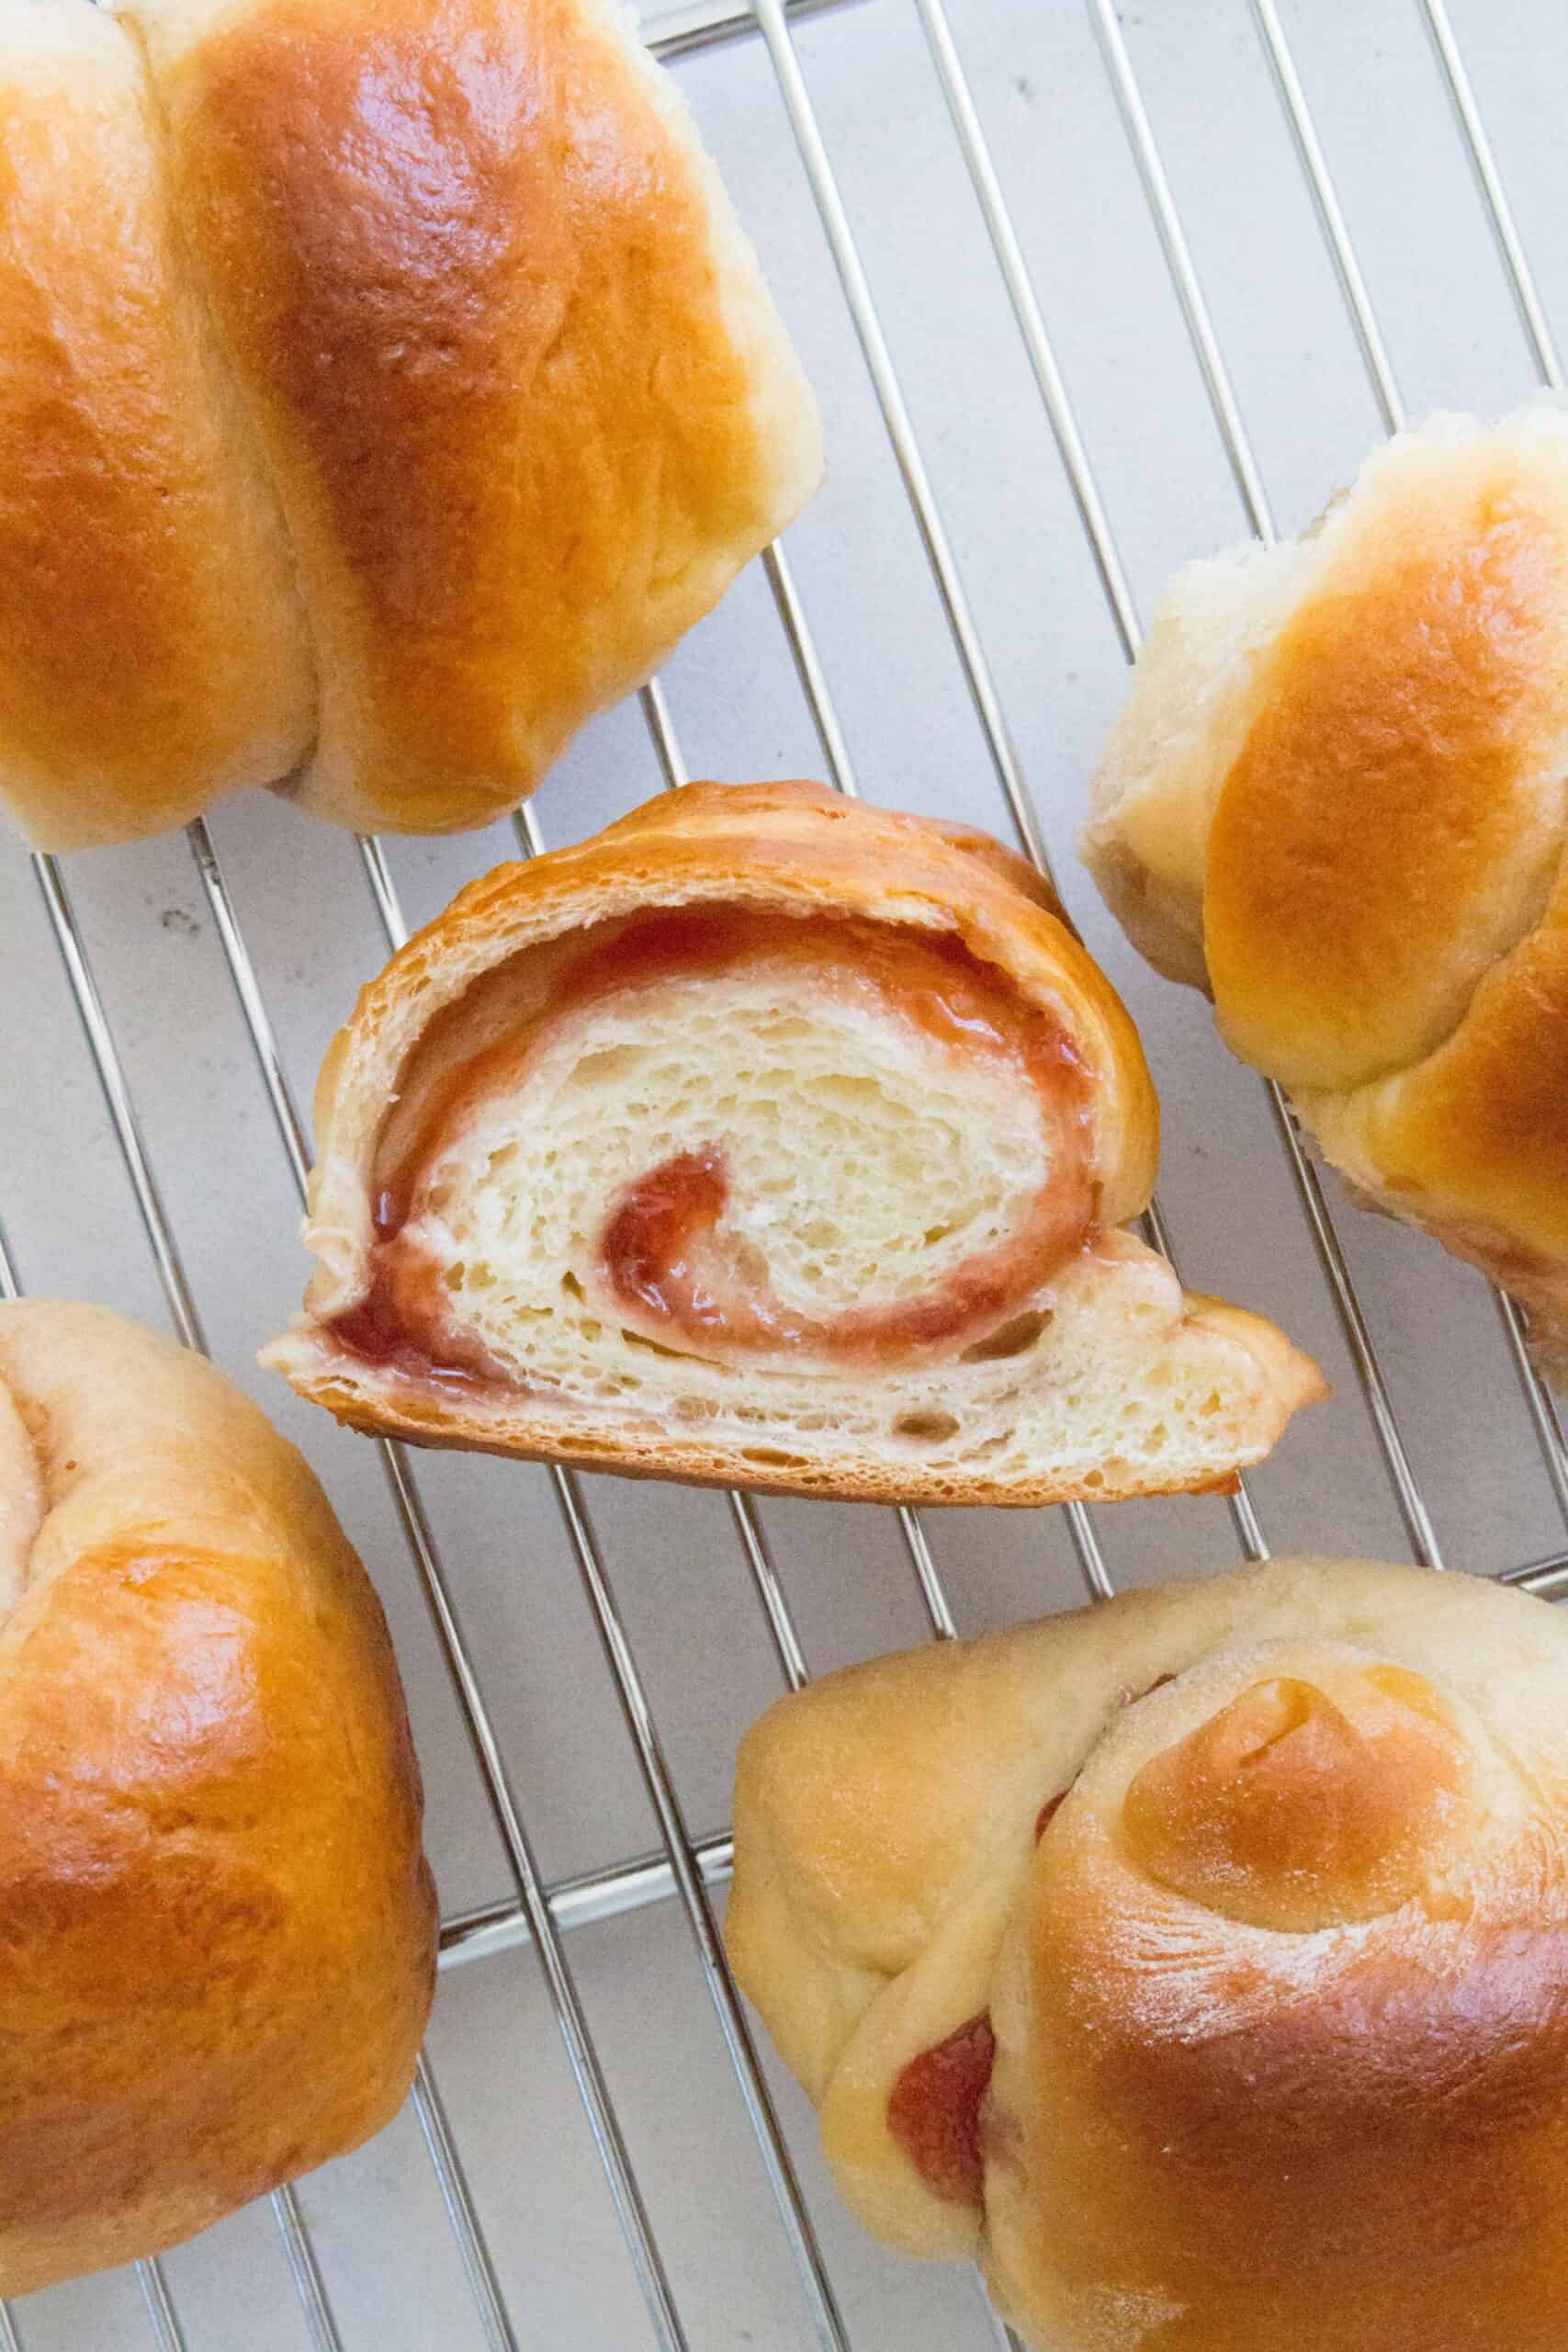 Here's how you can make strawberry swirled, fluffy, pillowy soft Hokkaido style milk bread rolls at home with this simple recipe. The perfect make ahead bread as they stay soft for days! Try these Japanese Milk Bread Rolls tonight!